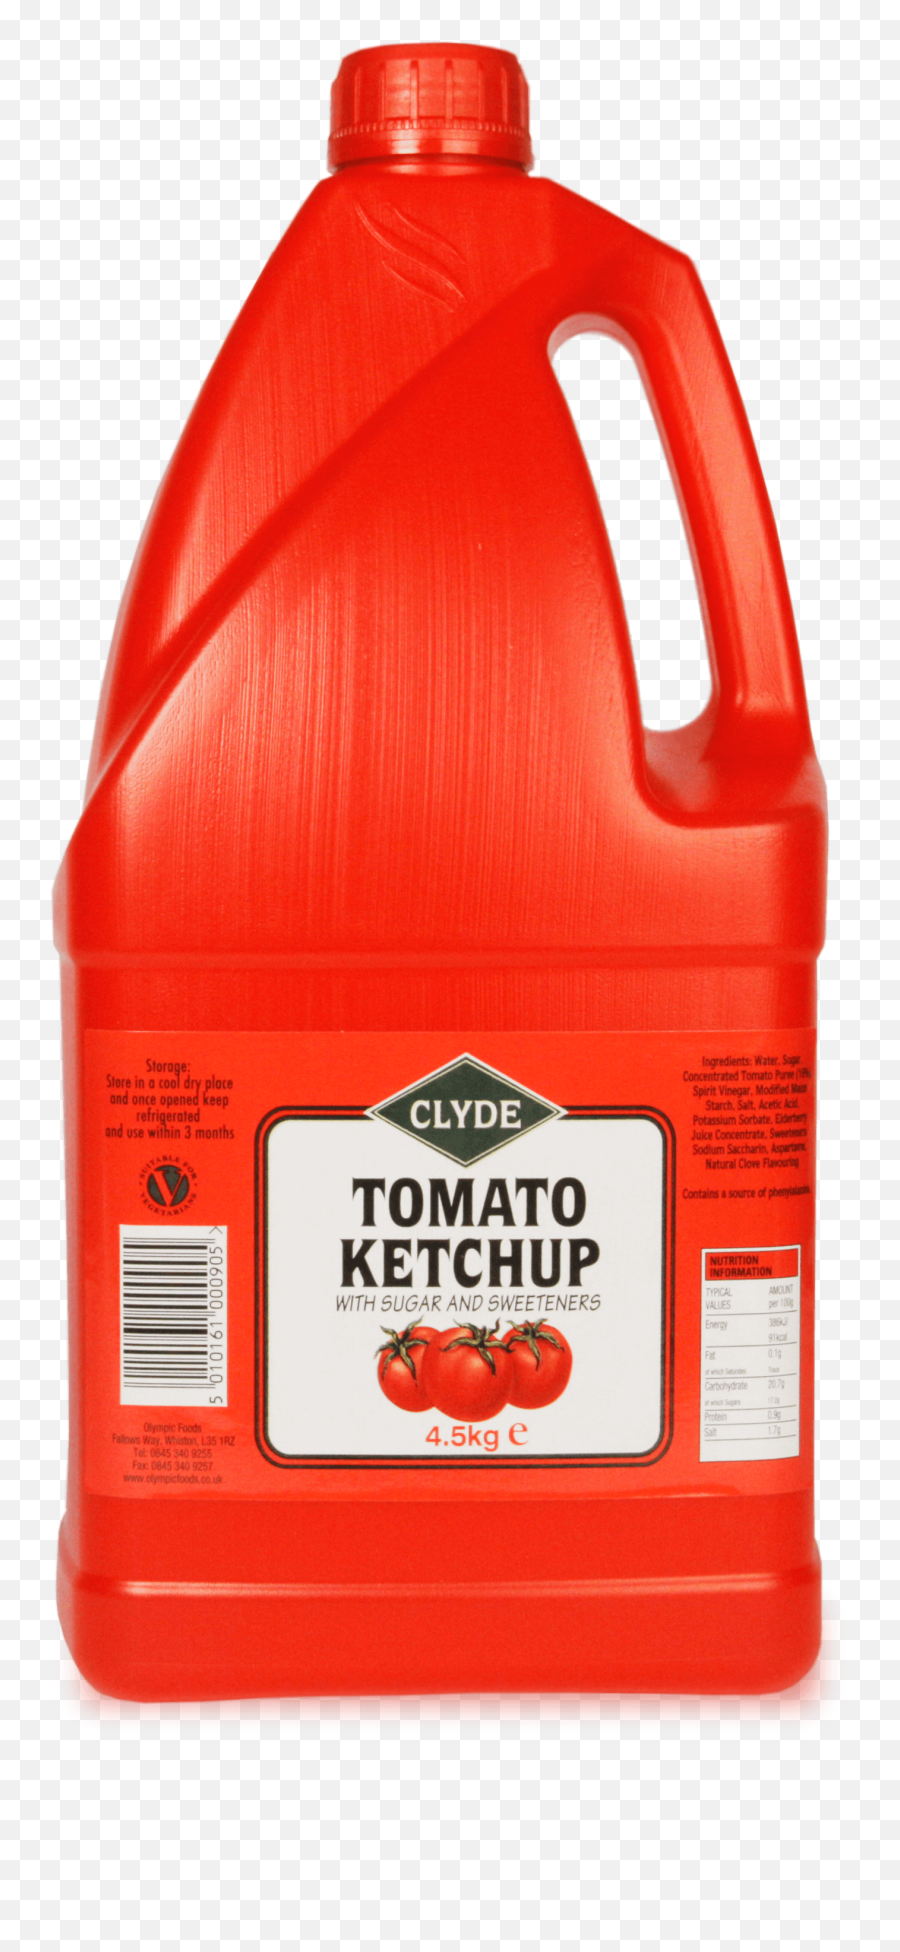 Clyde Tomato Ketchup 45kg Catering Jug - Olympic Foods Heinz Ketchup Png,Ketchup Transparent